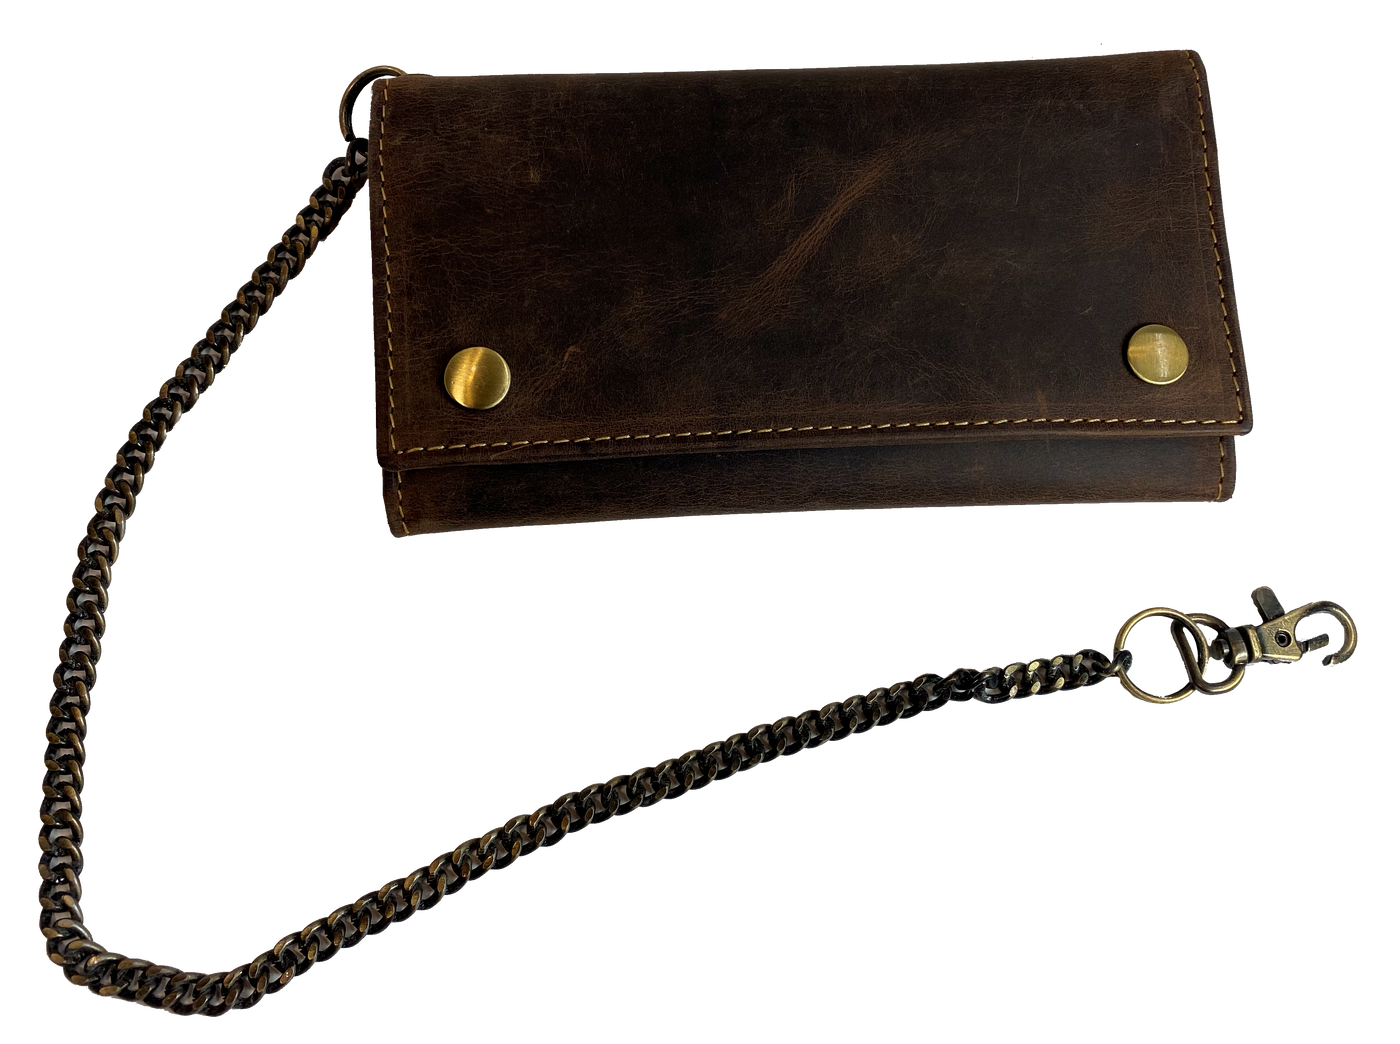 Popular Distressed brown Long Style RFID Secure Tri-fold Chain Wallet. 2 underneath cash slots, 14 card slots, I.D. slot, zippered pocket for all your important stash. Will darken with a nice patina with use. It's imported but it's Buckle and Hide approved. Standard long tri-fold size. Size is 6 3/4" x 3 3/4" when snapped closed. Fully open is 10 1/2" x 6 3/4".